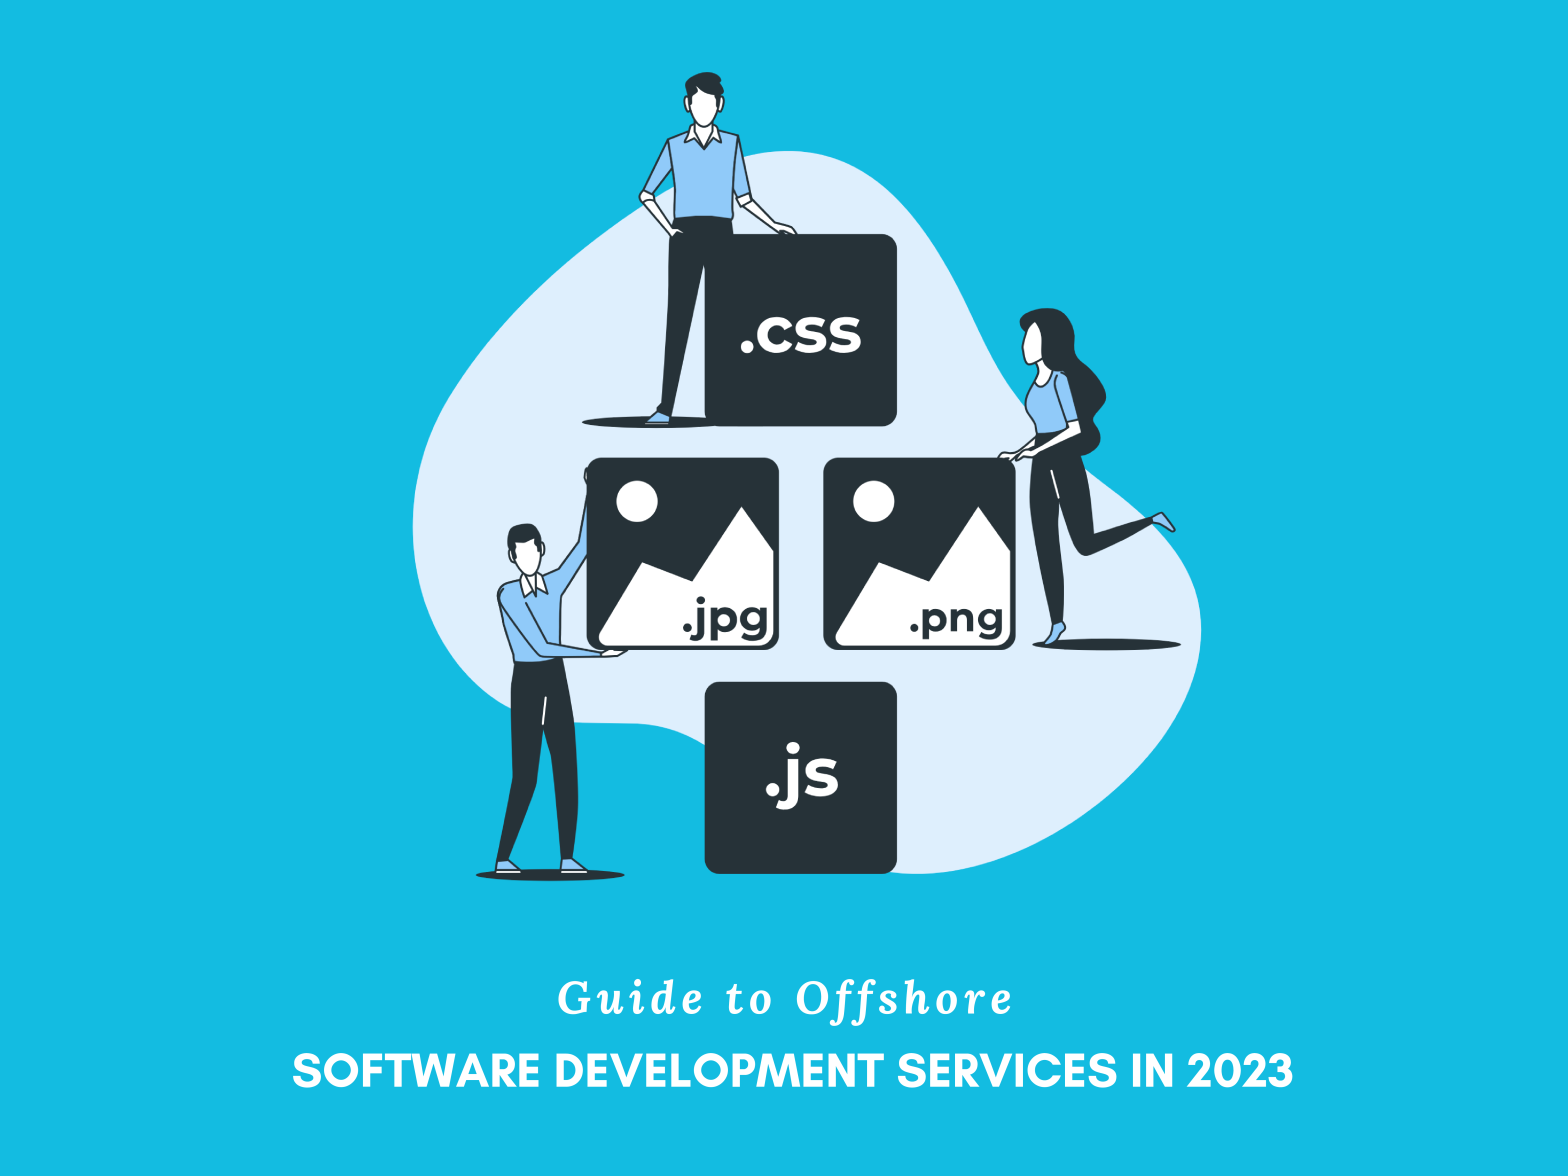 Guide to Offshore Software Development Services in 2023